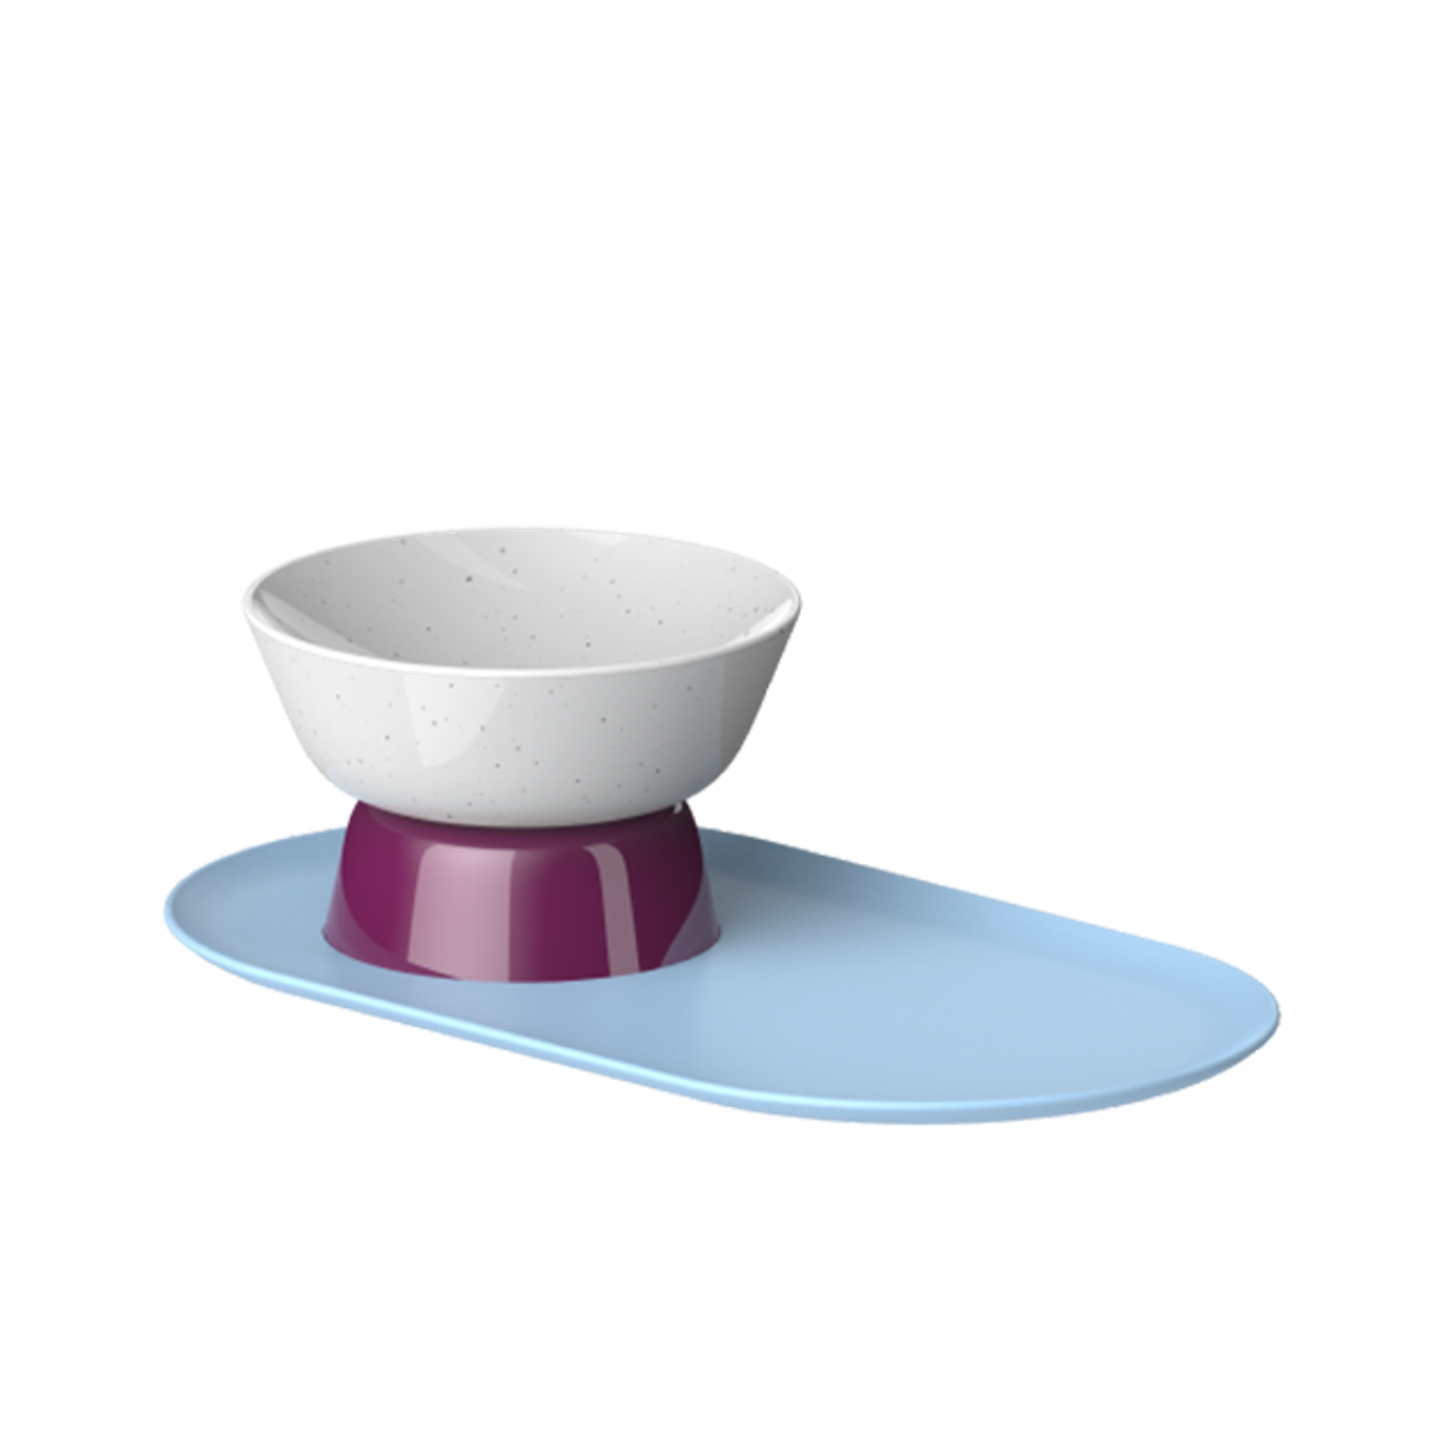 Cat Person mesa bowl in tundra colorway